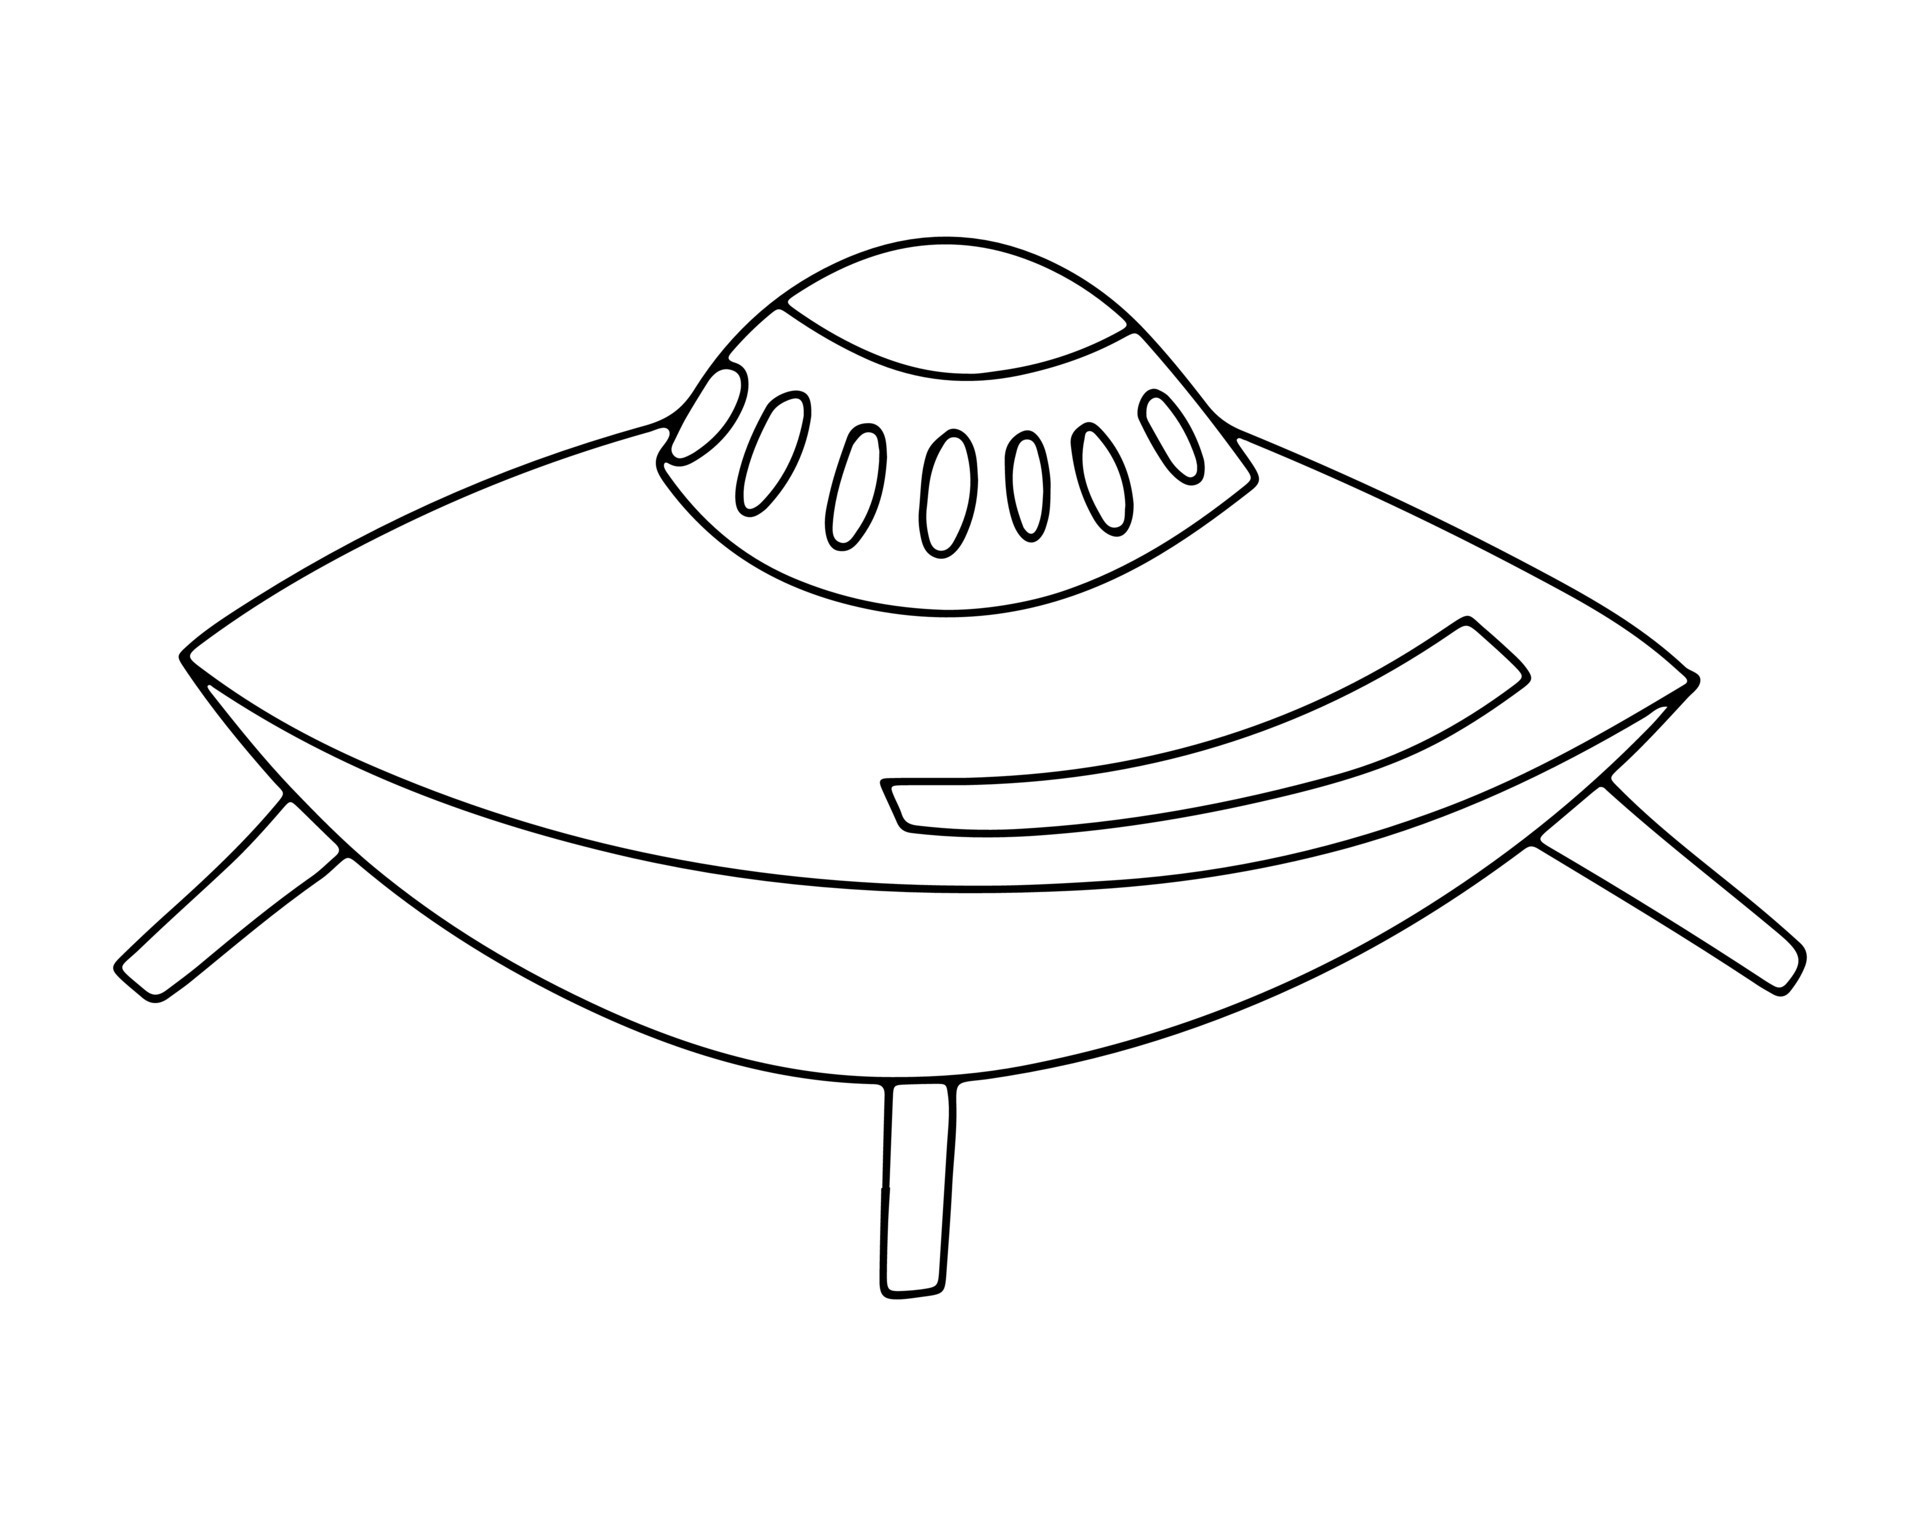 The flying saucer is drawn with a black outline. Icon, doodle, flying ...